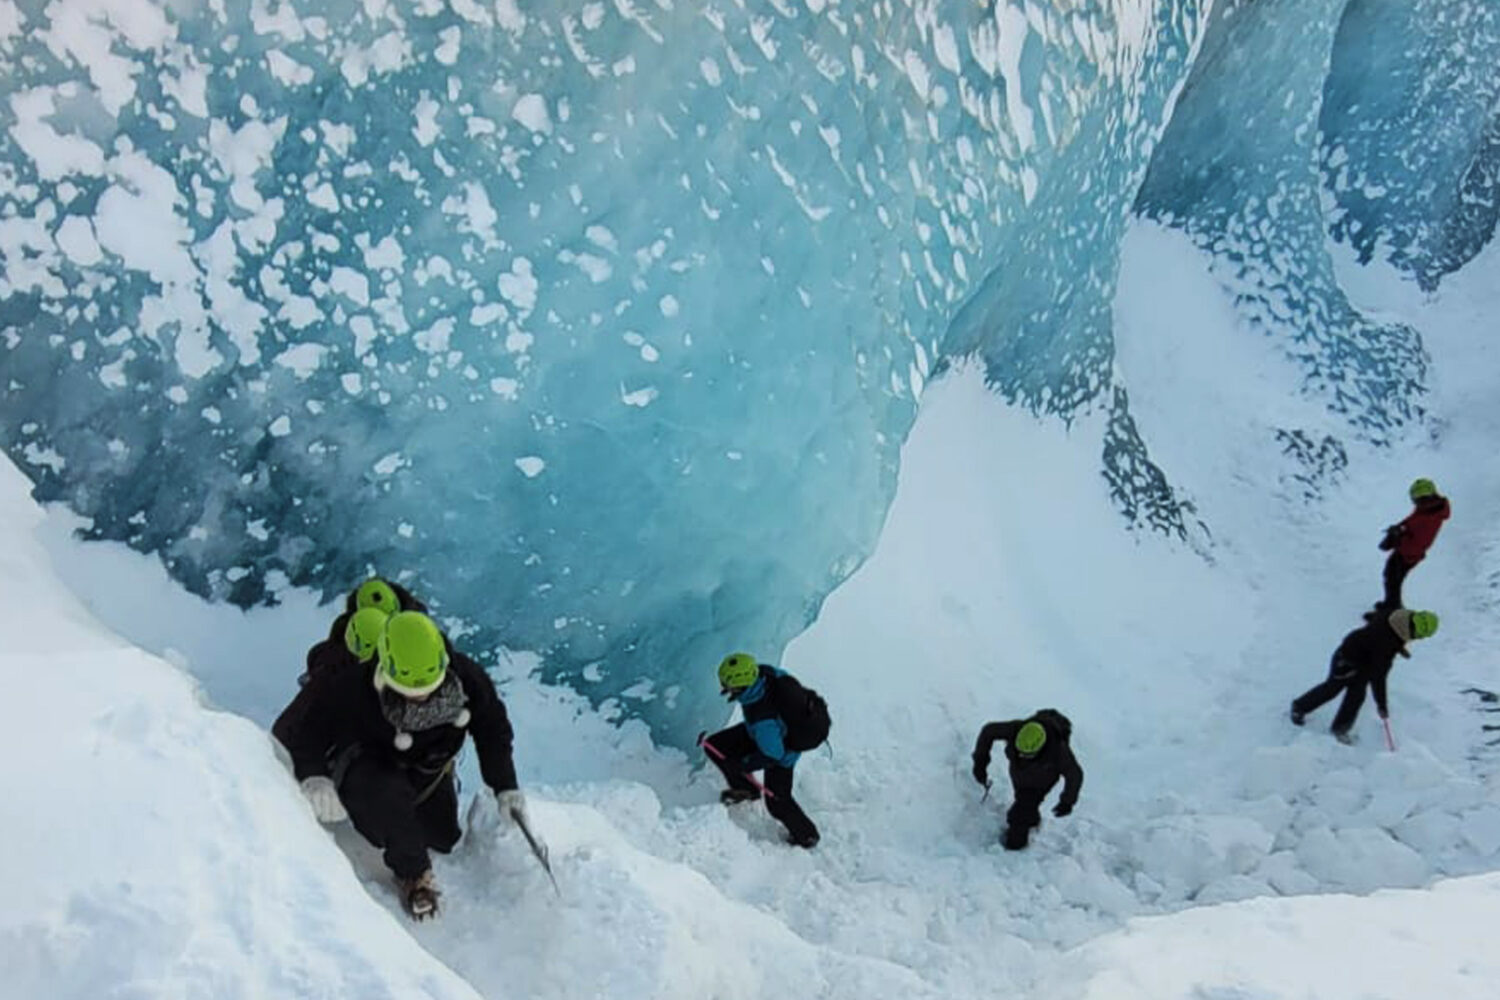 People climing out of a large crevasse